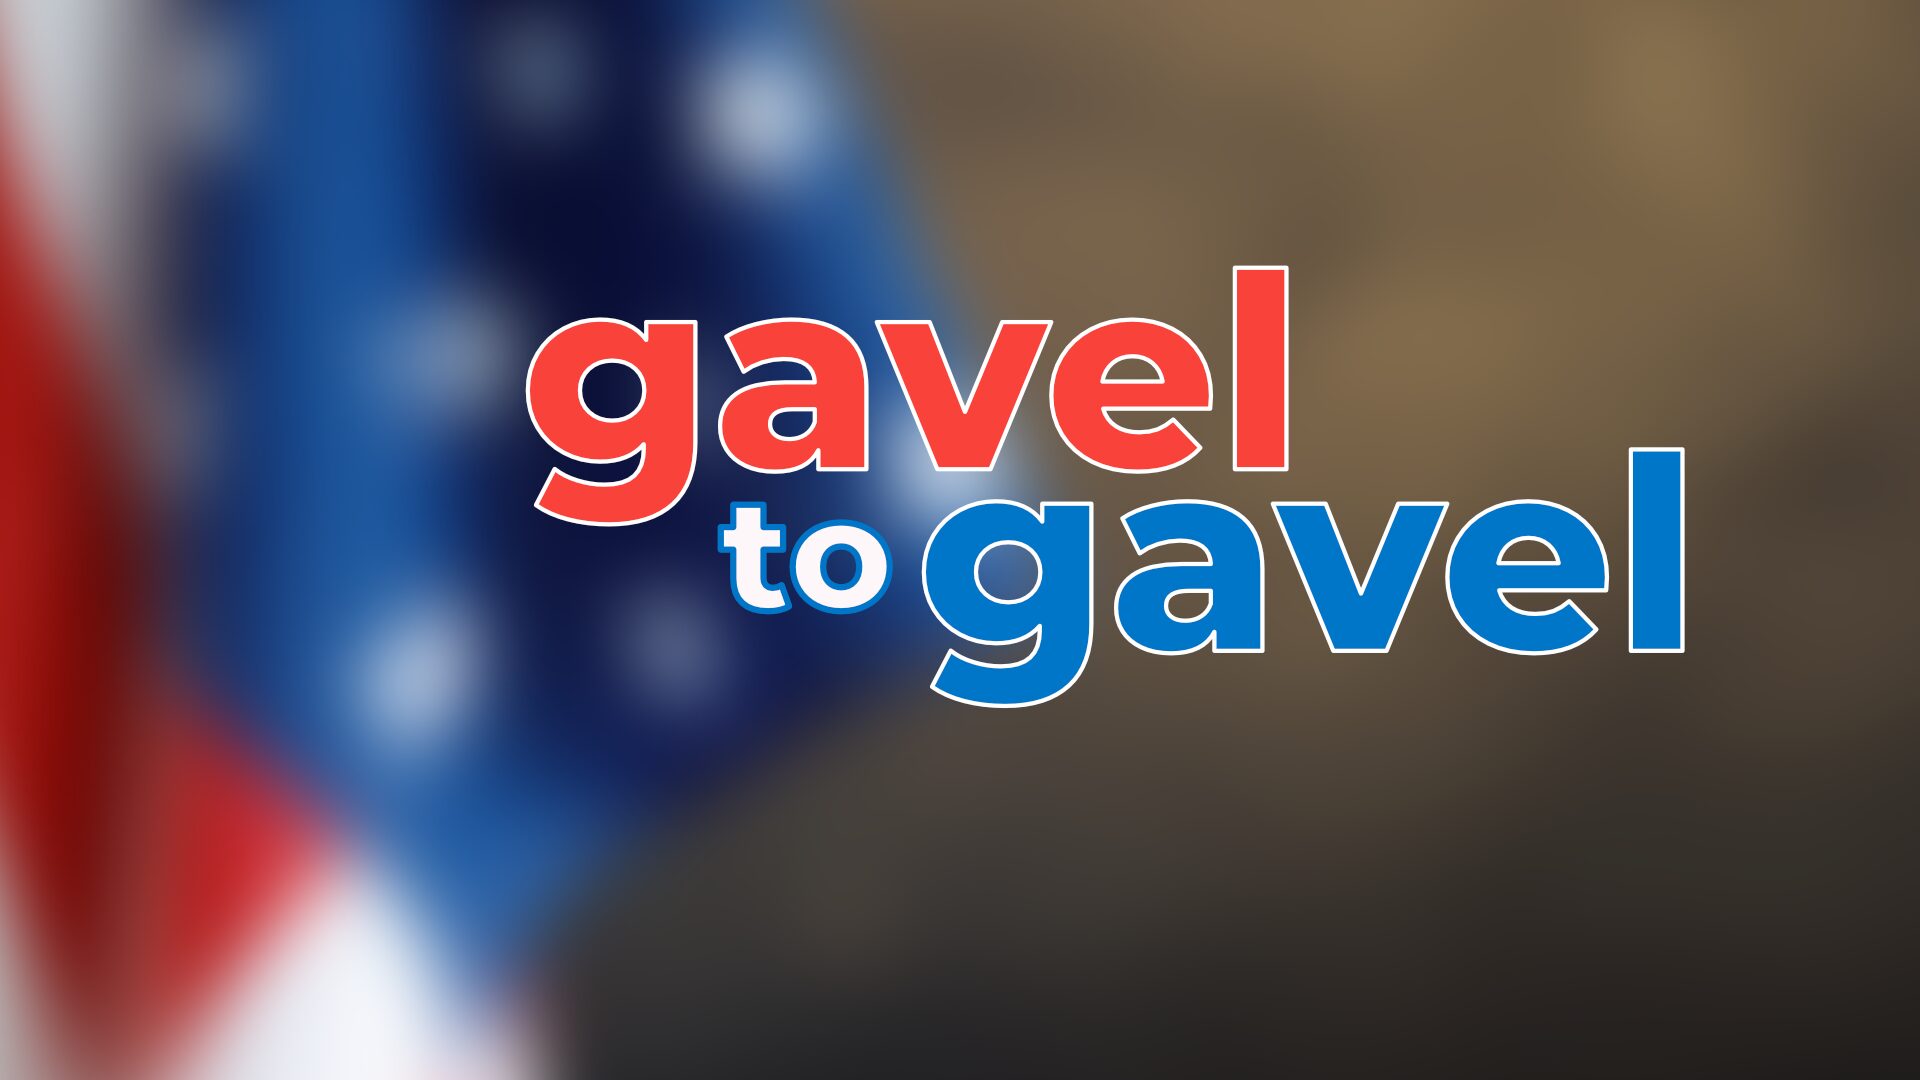 gavel to gavel over image with american flag in background